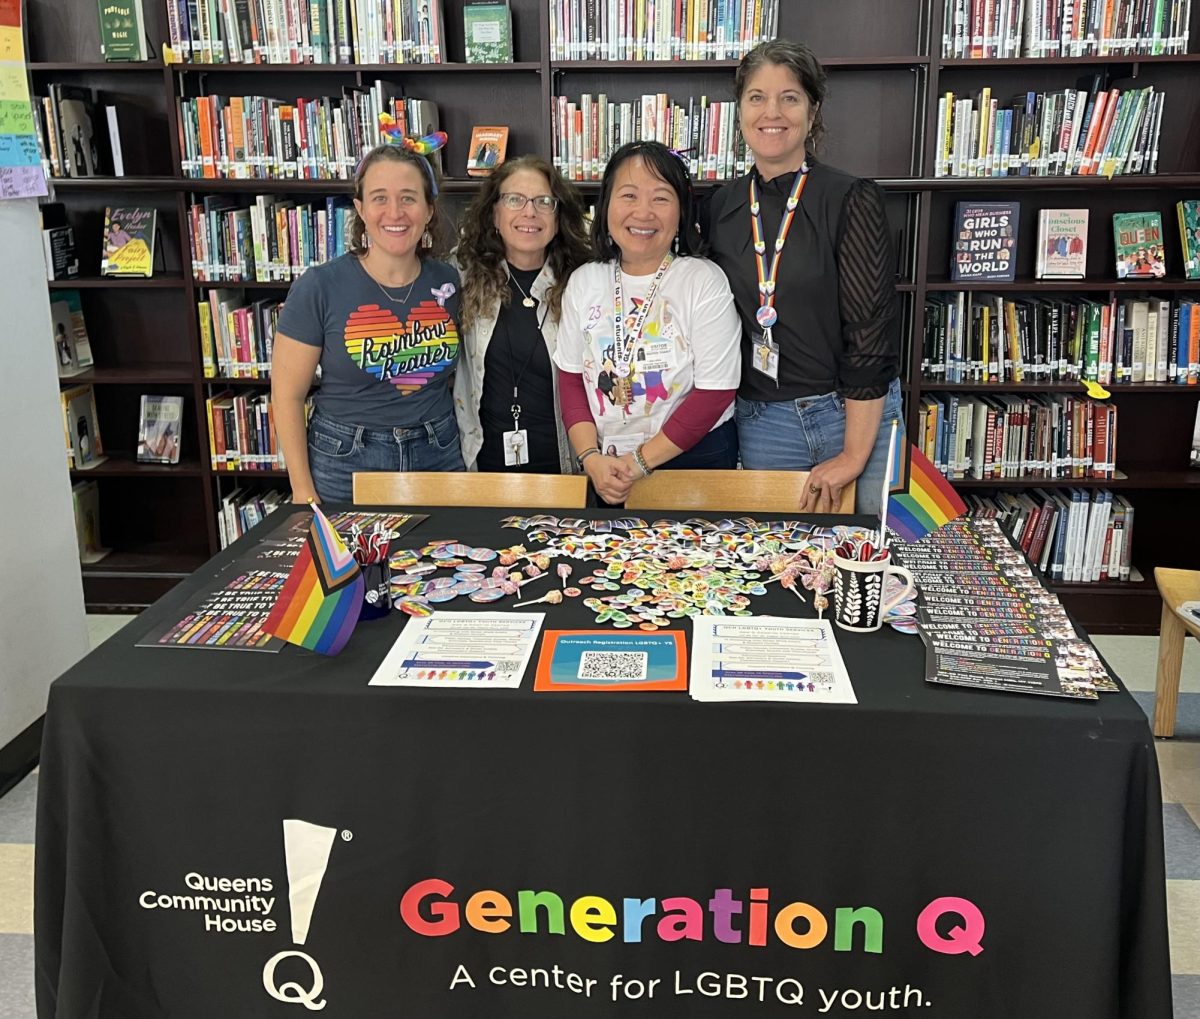 From left to right: GSA Advisors Ms. Klemas and Ms. Ezratty with Generation Q Staff LoAn Nguyen and Keri Satterfield
